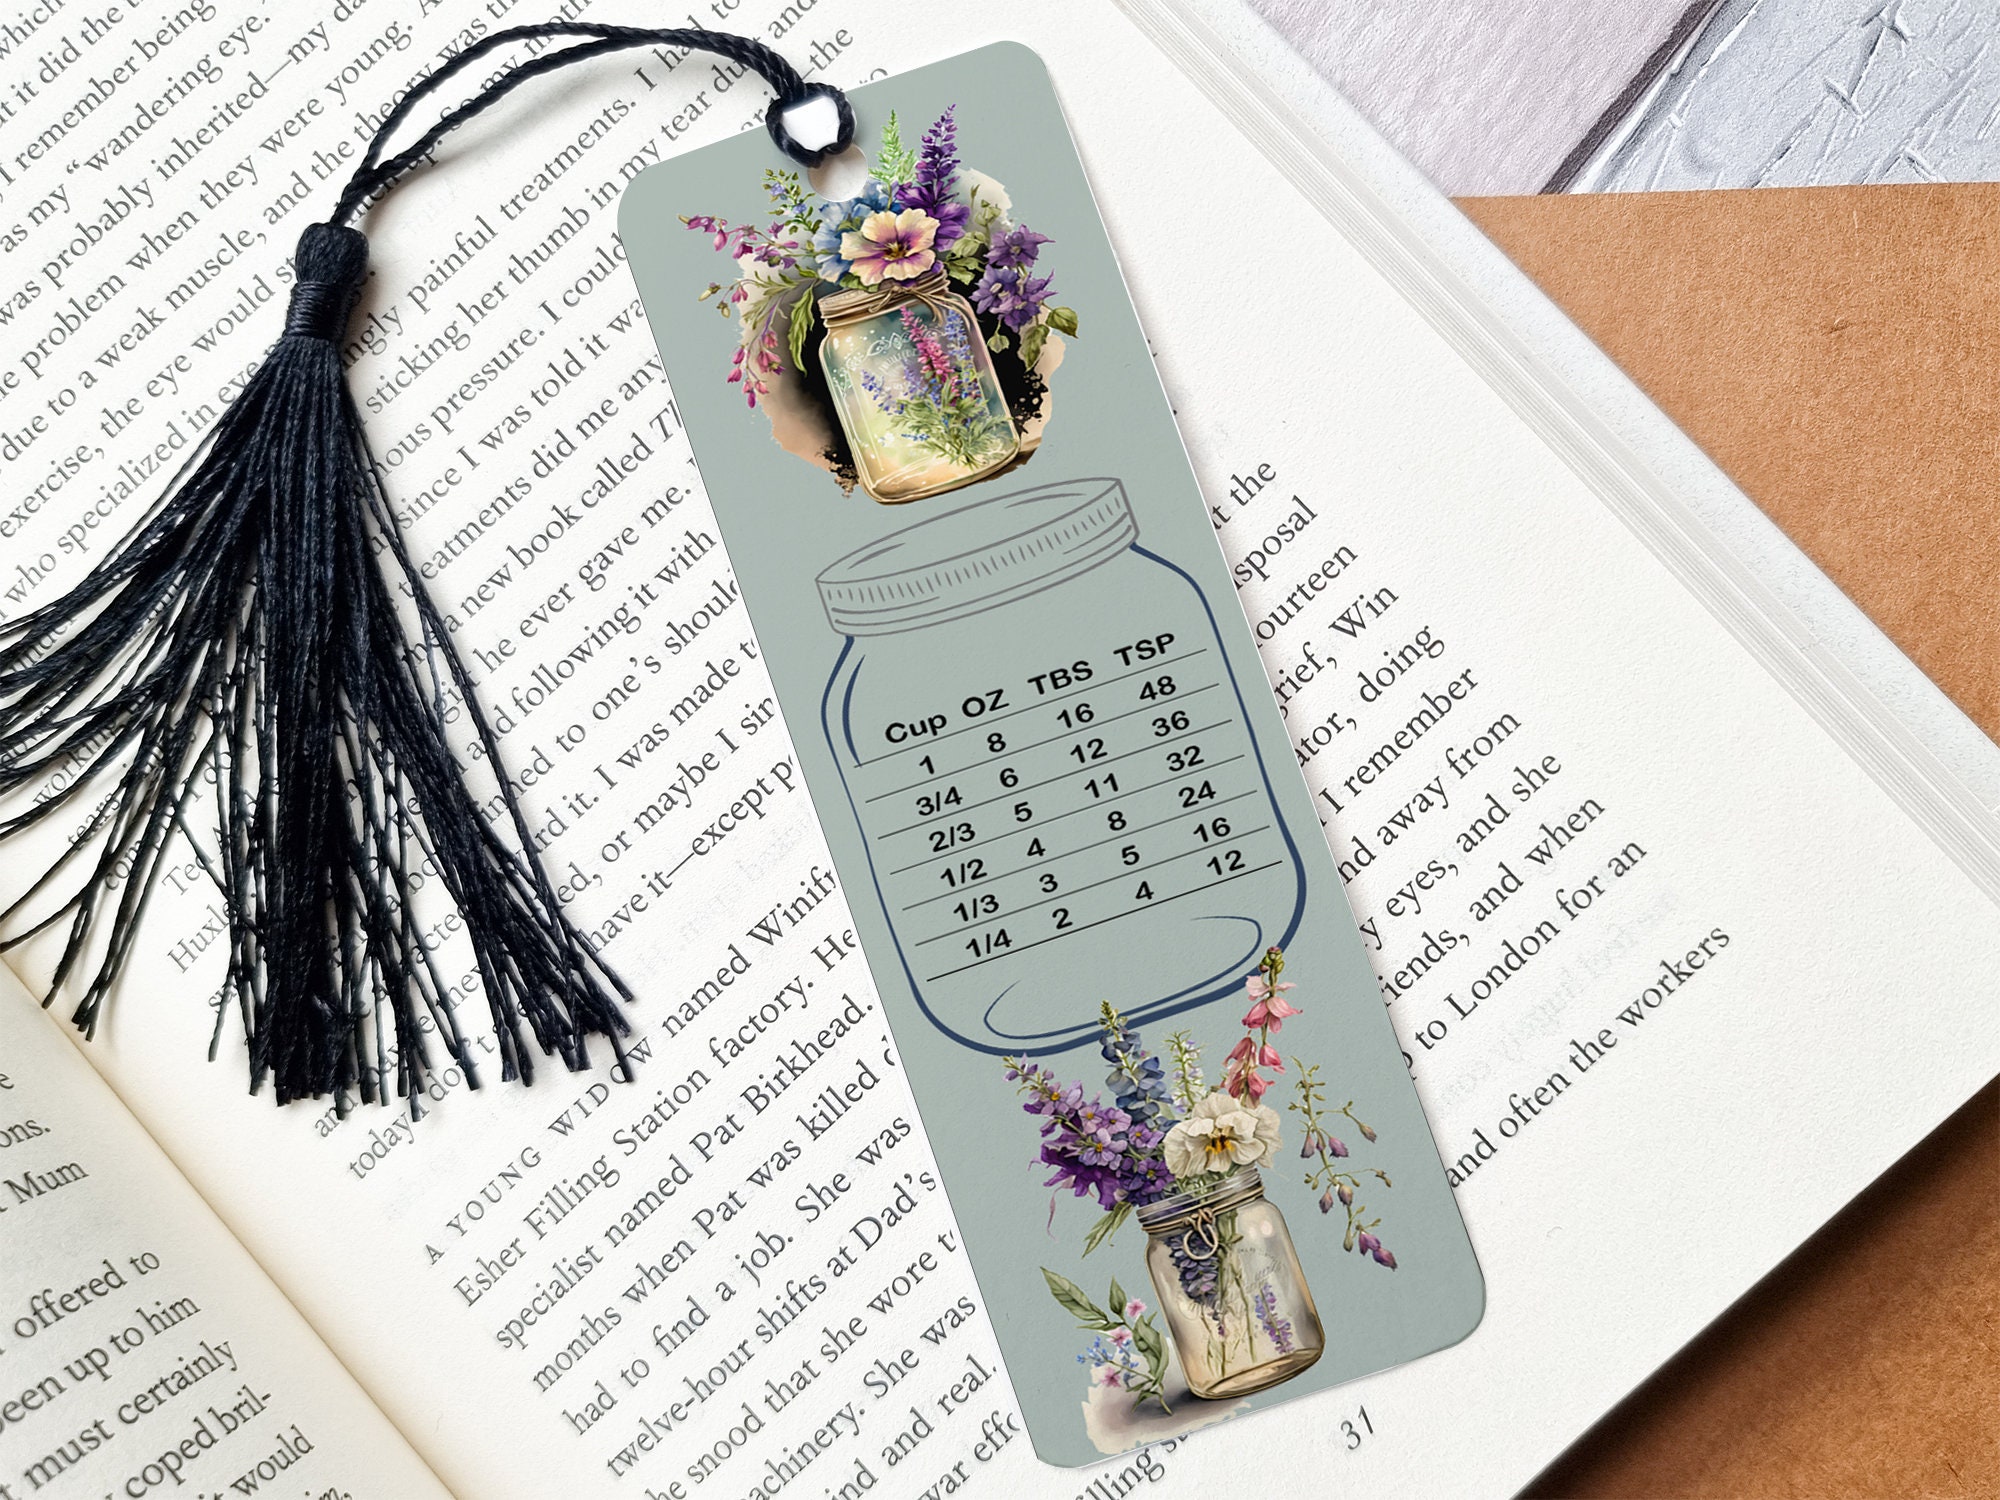 Bookmark 6*18Cm, 10Pcs Bookmark Blank Bookmarks With Tassels For Diy  Project Crafts Making Decoration,Style 3